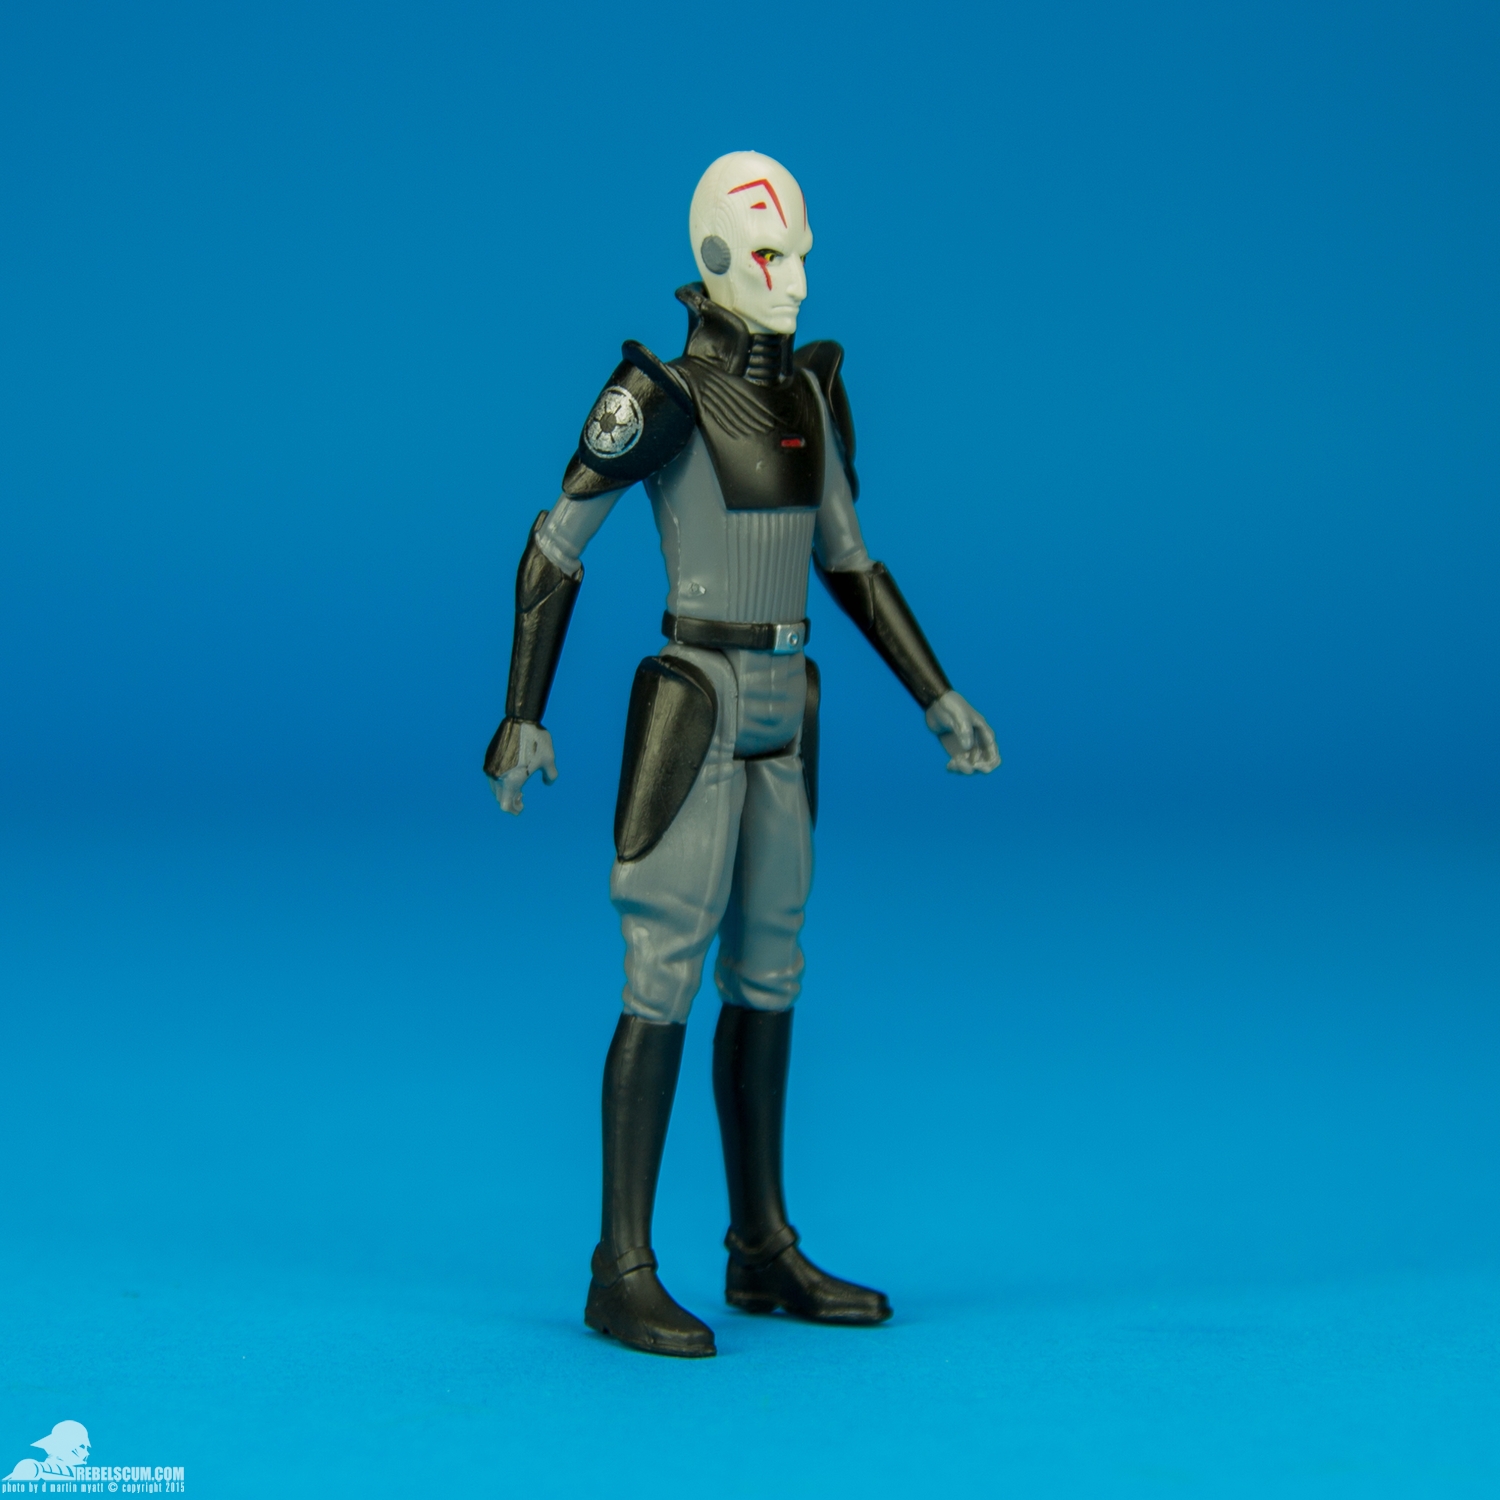 The-Inquisitor-Star-Wars-The-Force-Awakens-002.jpg